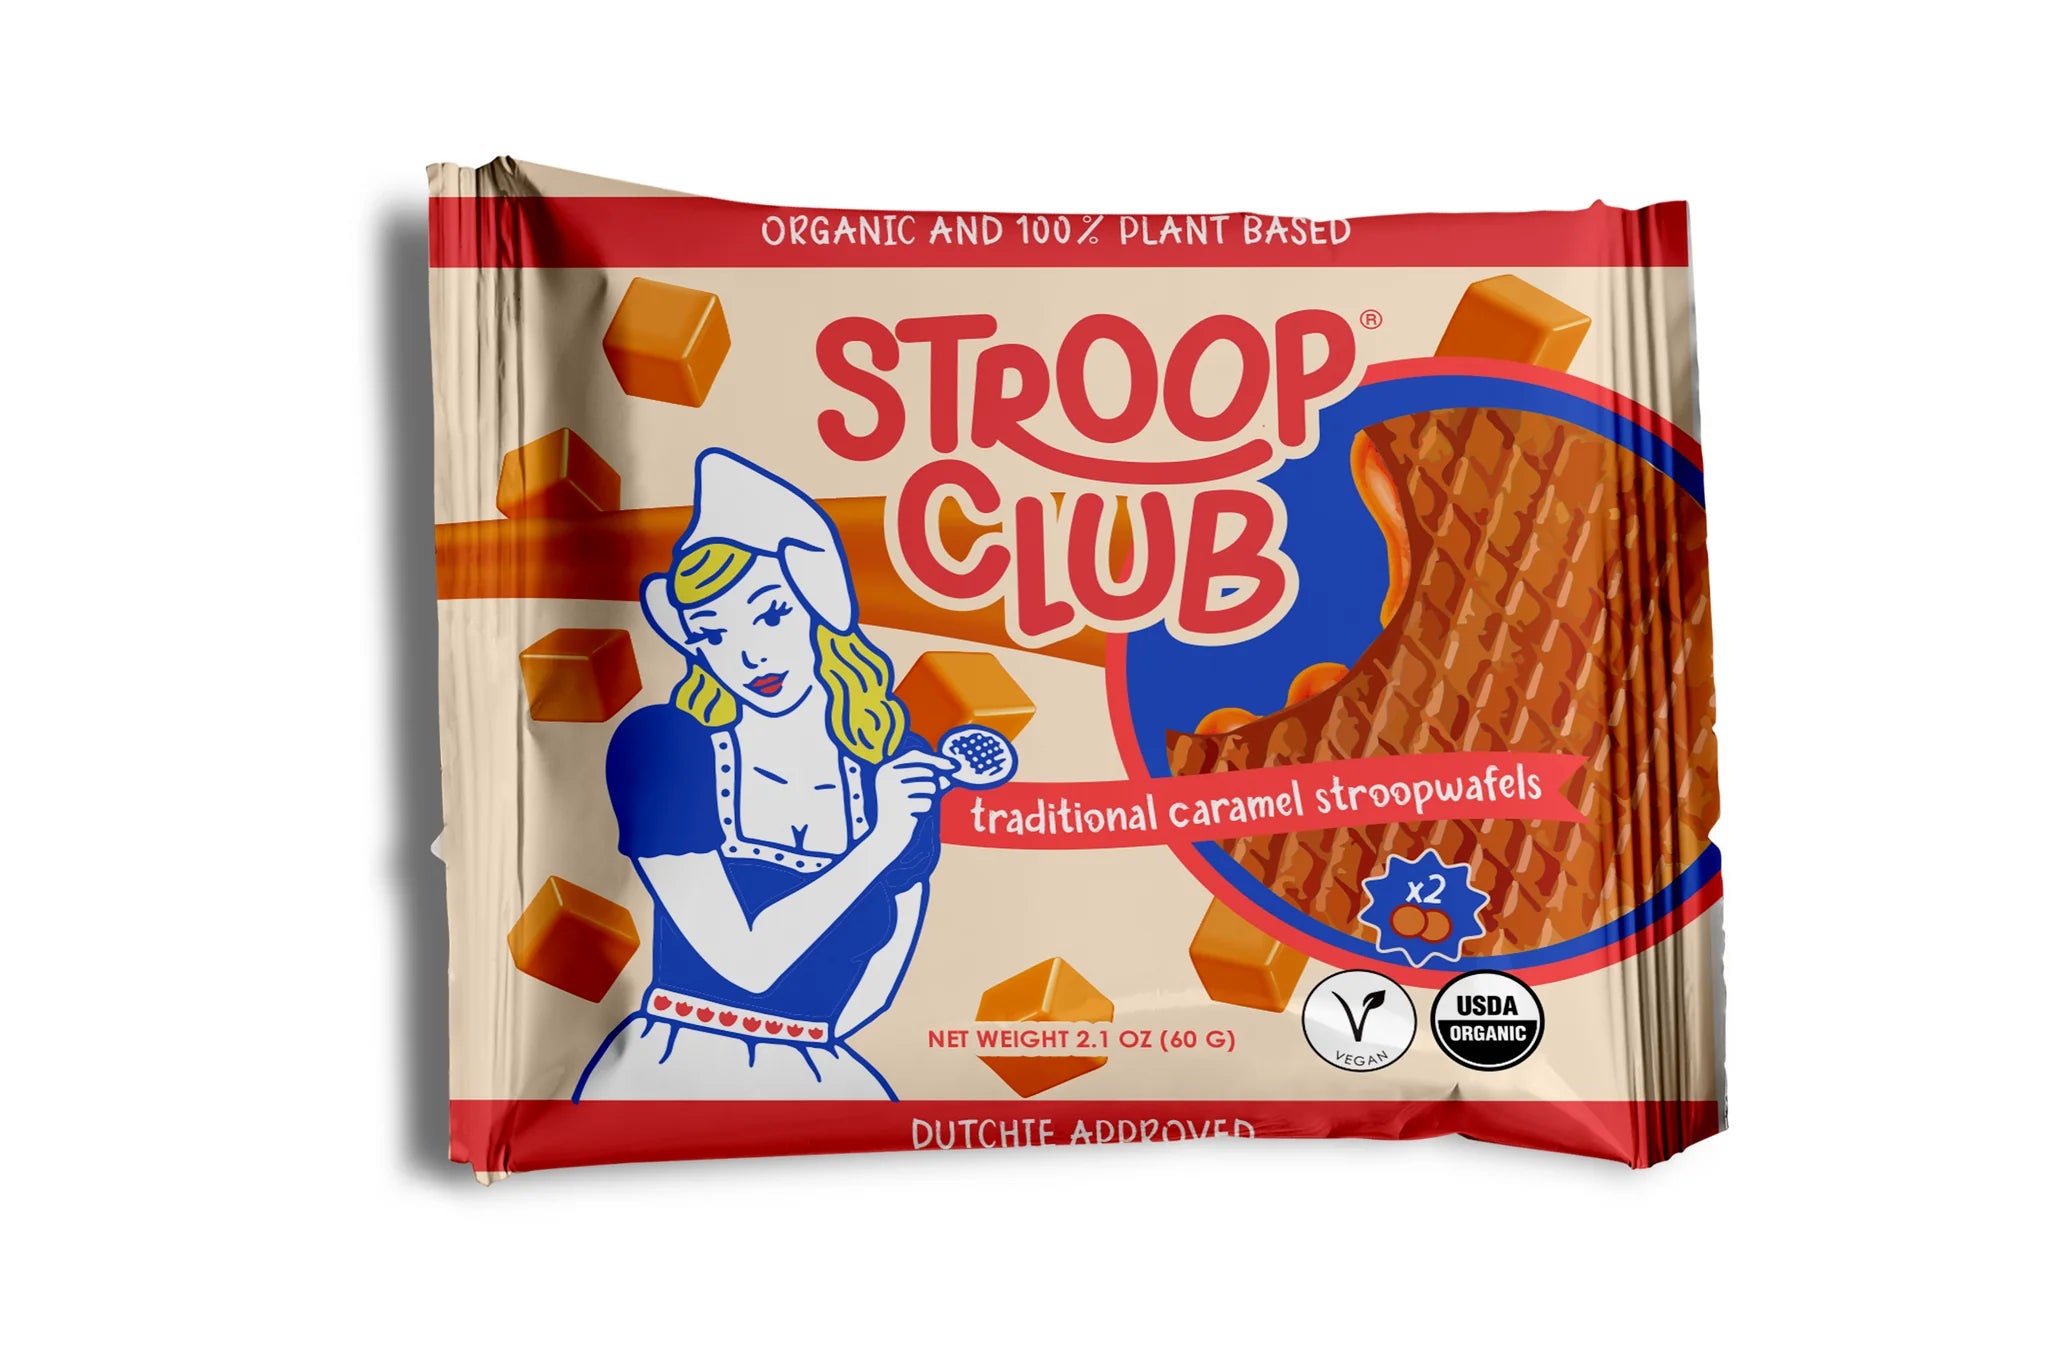 Traditional Caramel Plant Based and Organic Stroopwafels